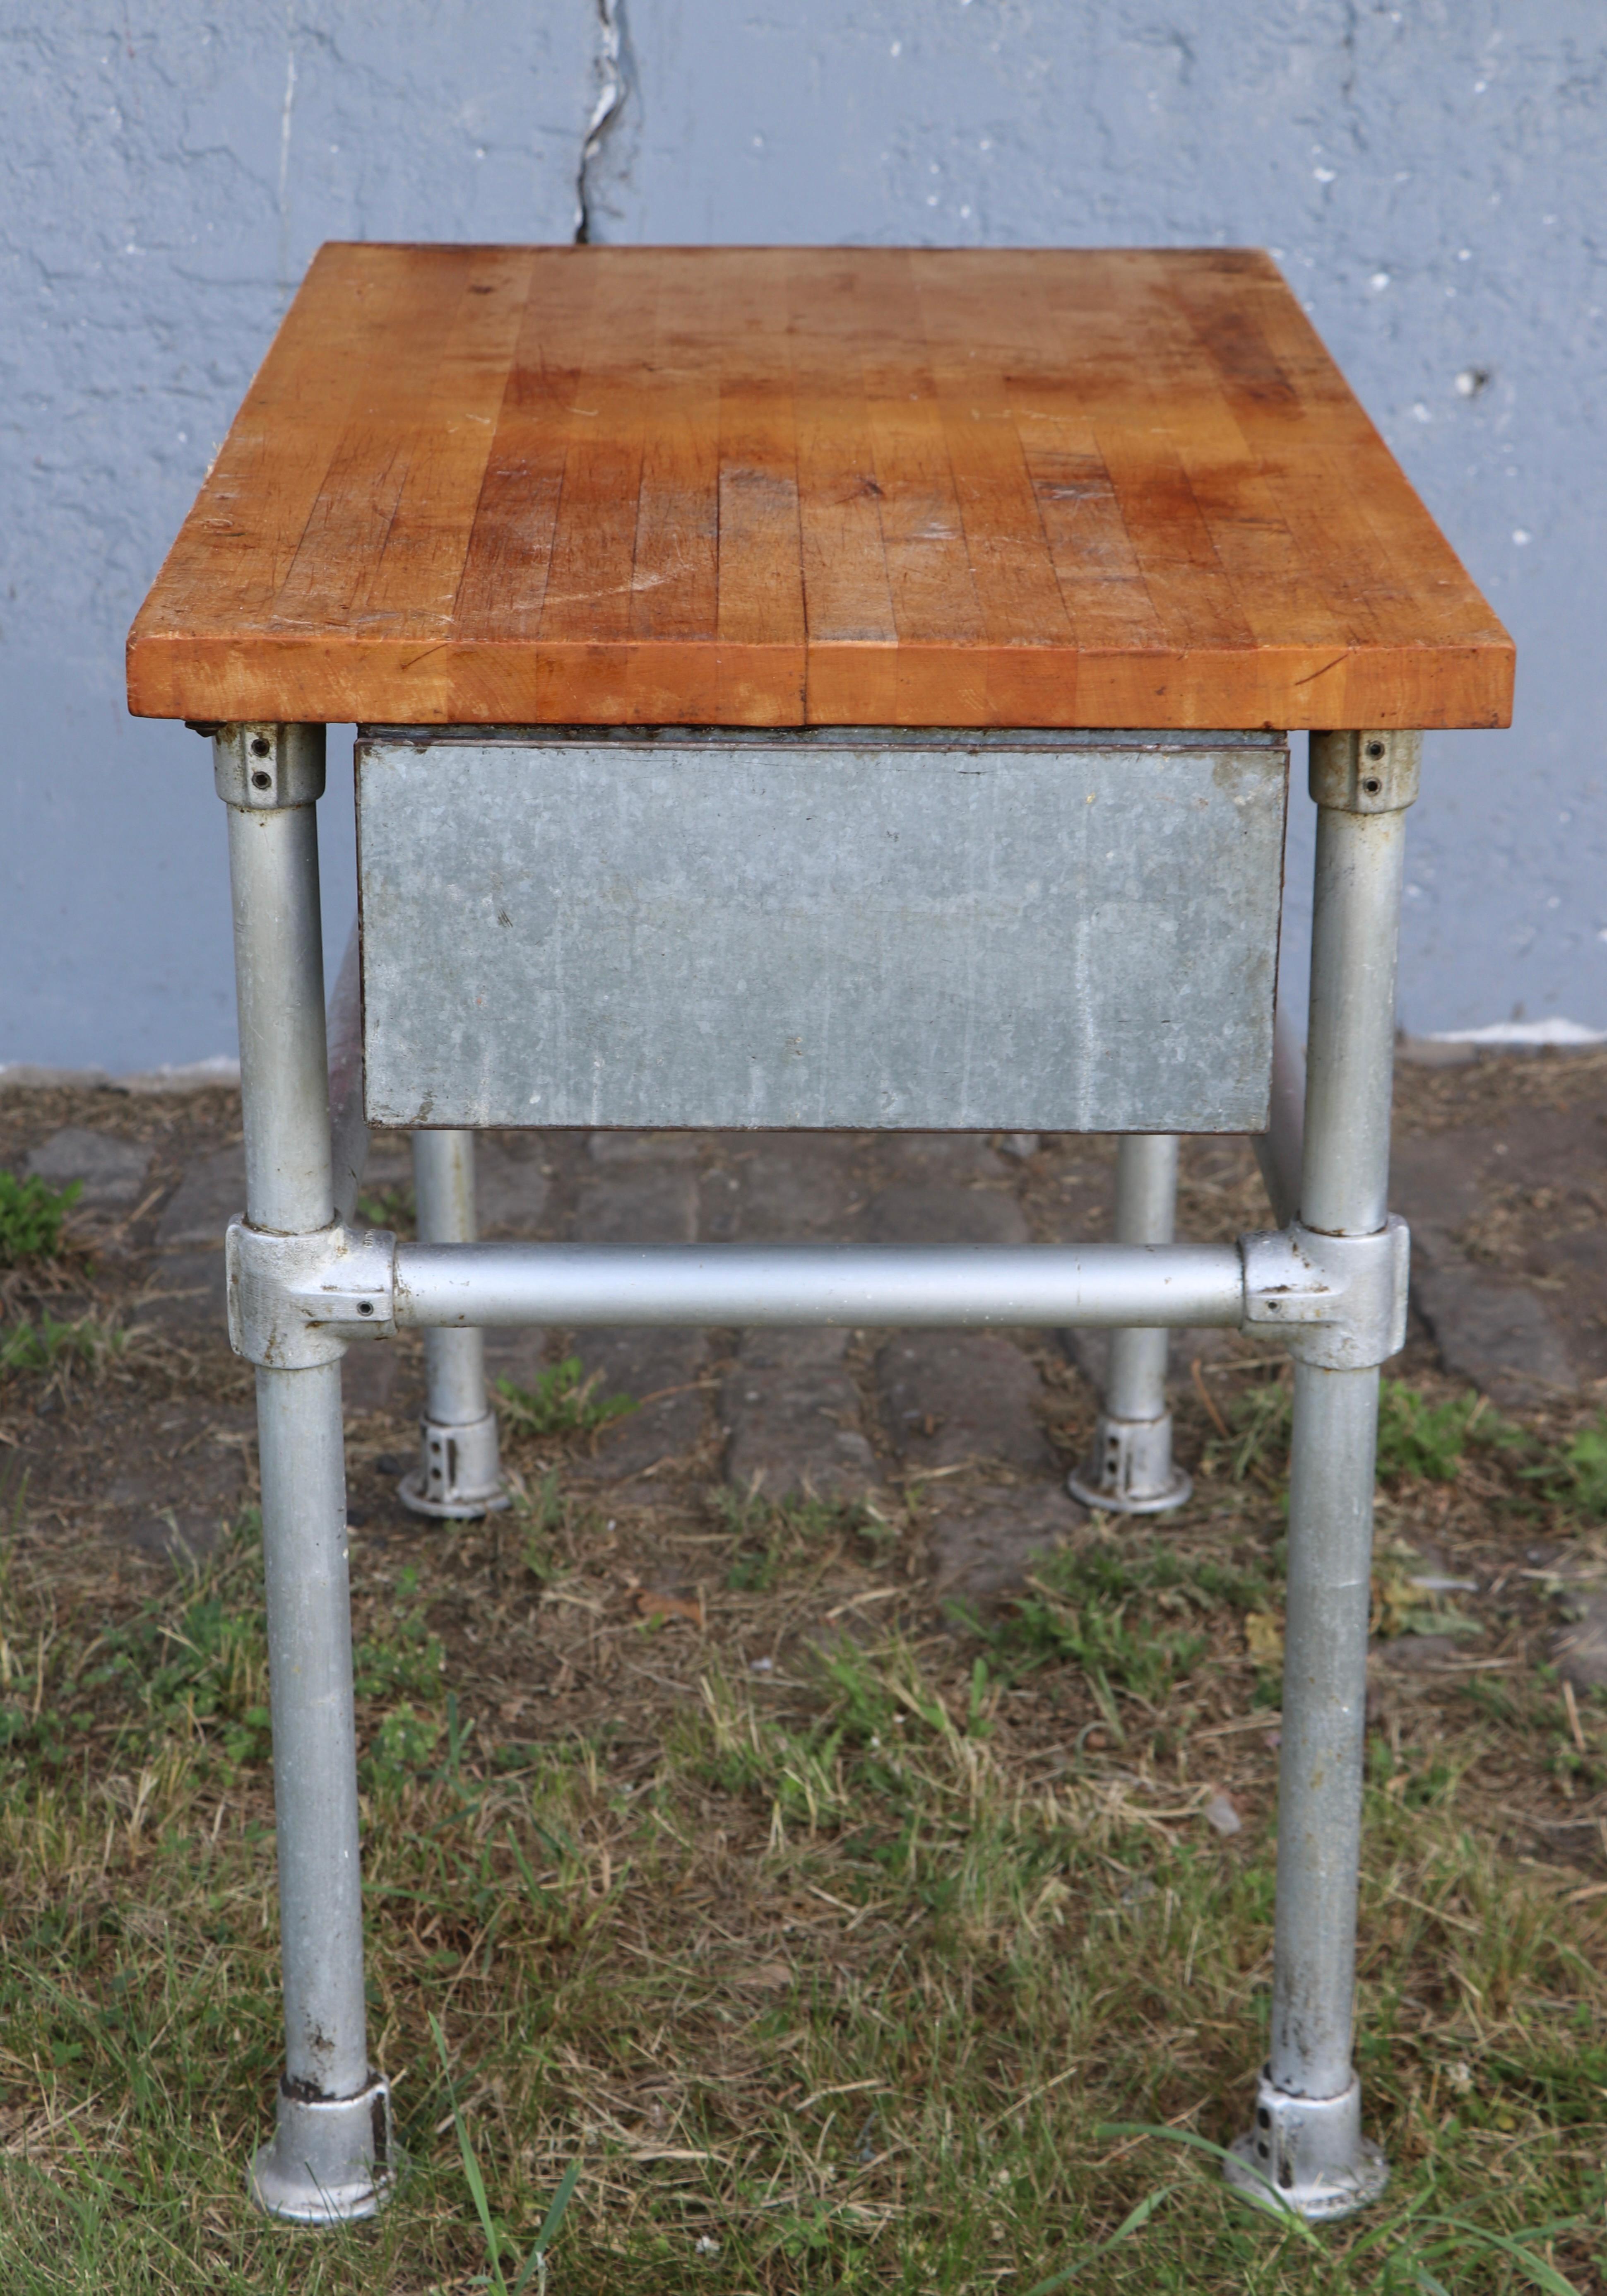 Nice butcher block top, iron pipe base commercial grade work table with a deep storage drawer. The table is in good original condition, sturdy stable and ready for regular and heavy use, shows expected signs of age and use. This example was